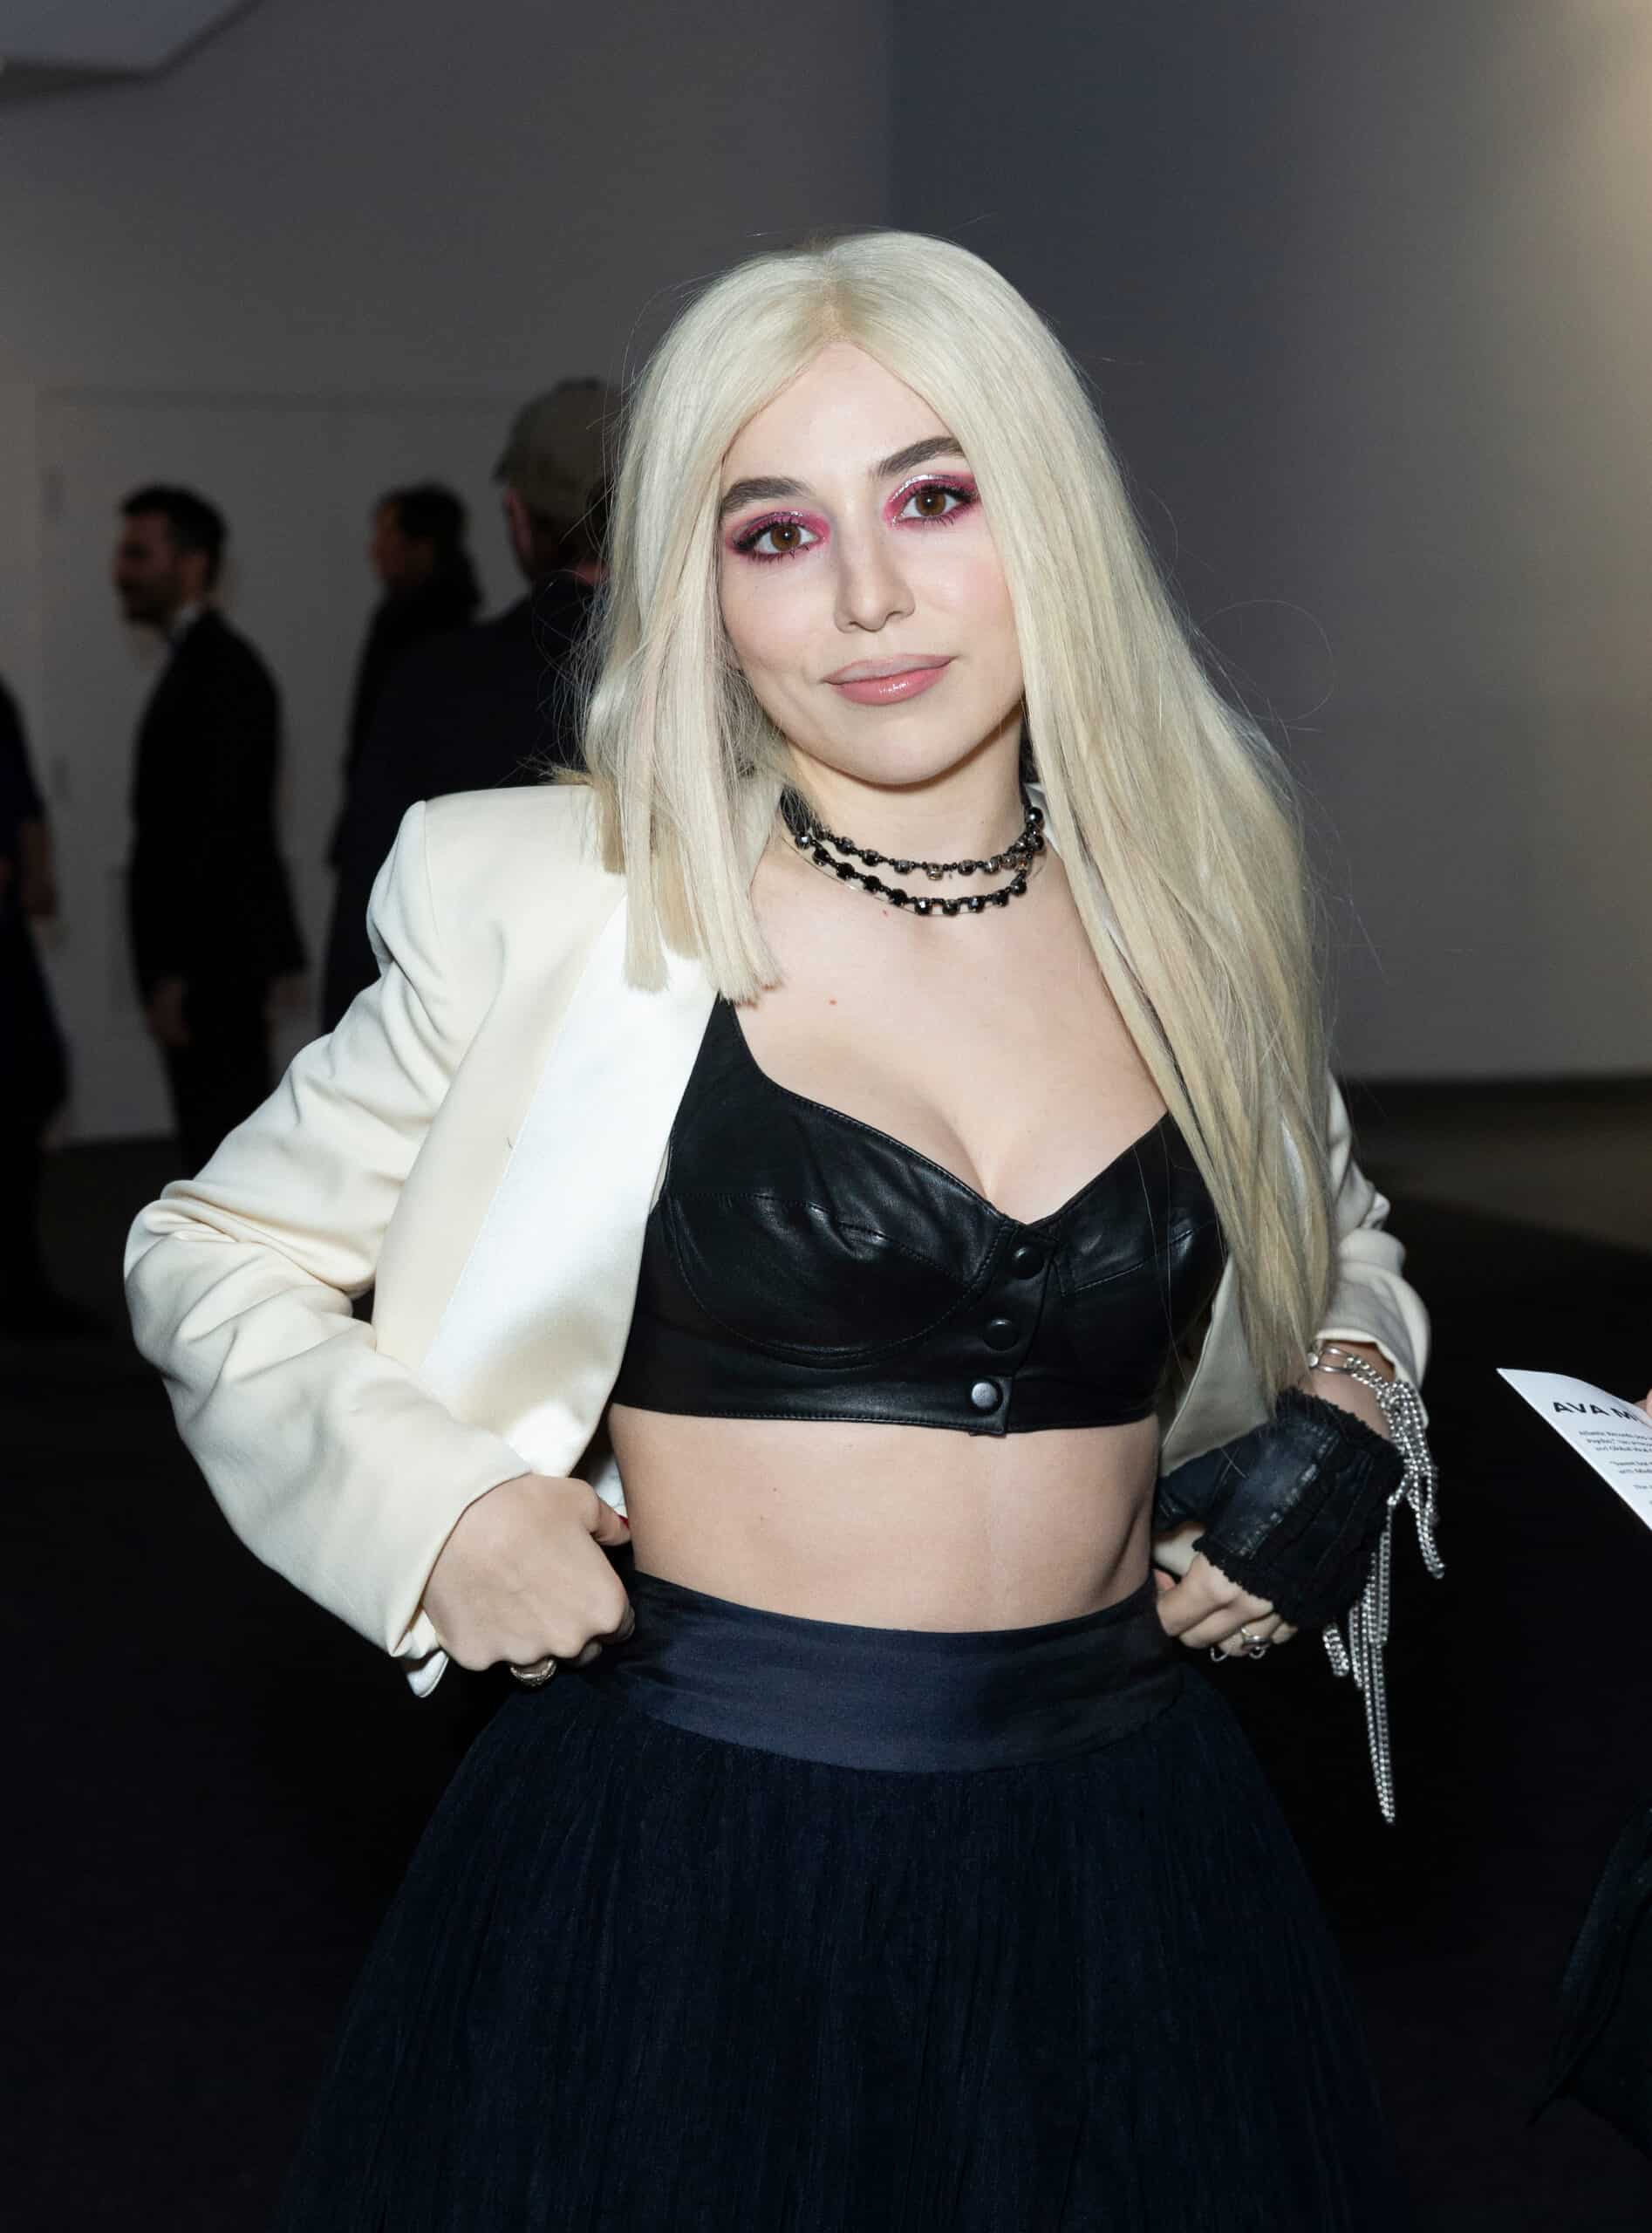 Does ava max have tattoos